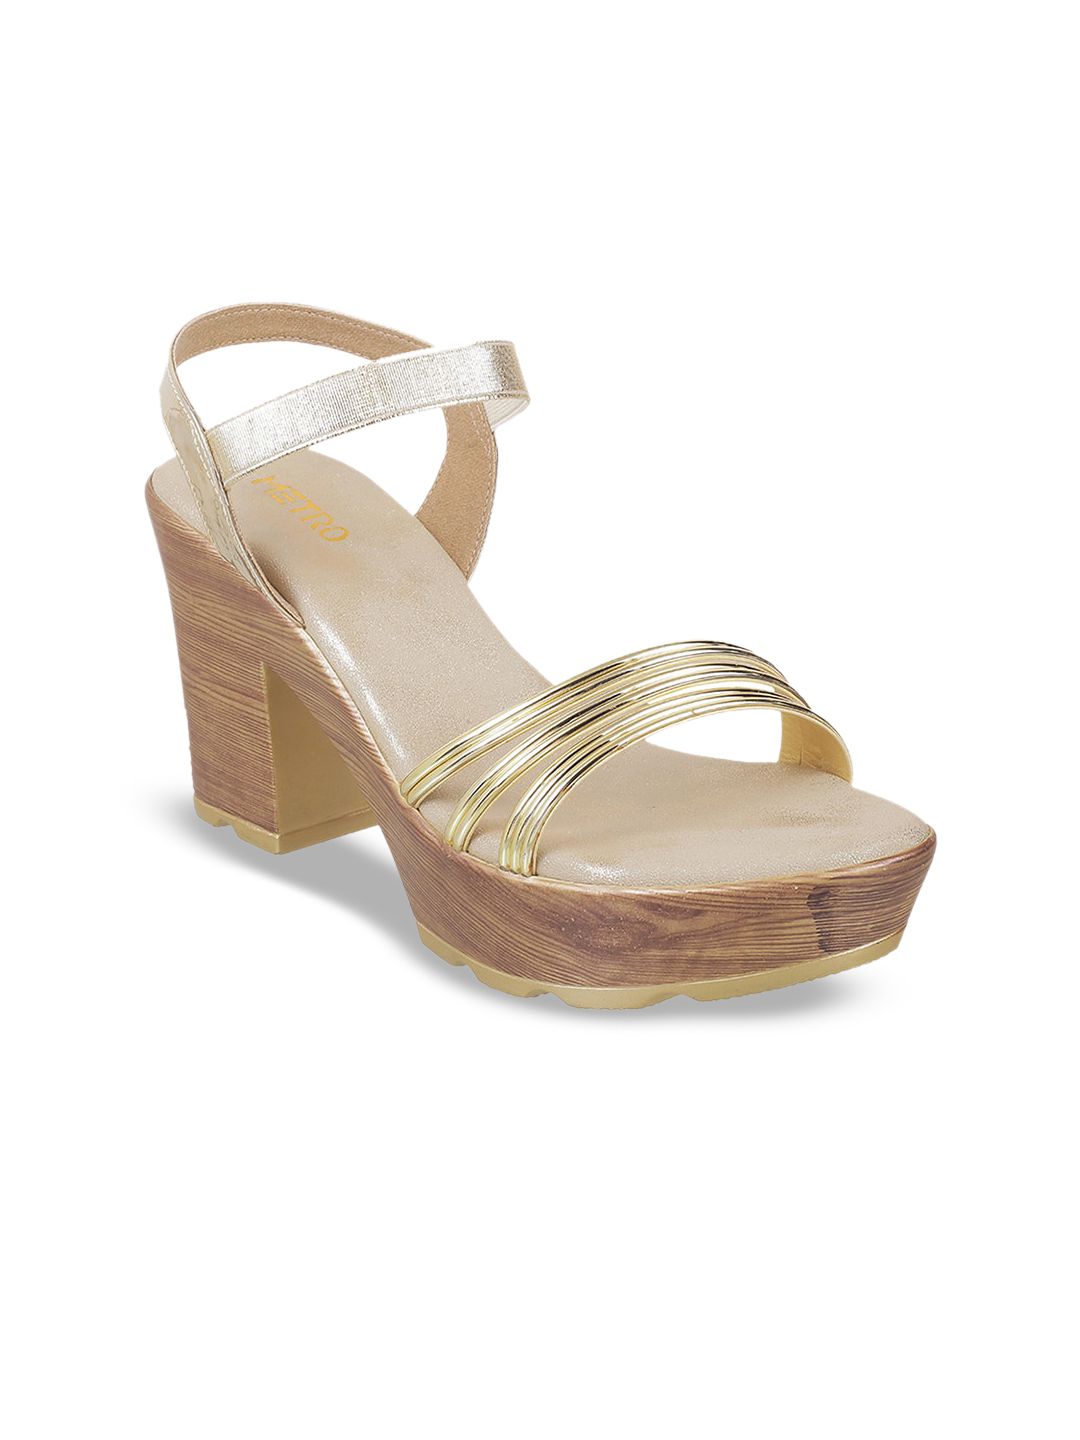 Metro Gold-Toned Wedge Sandals Price in India